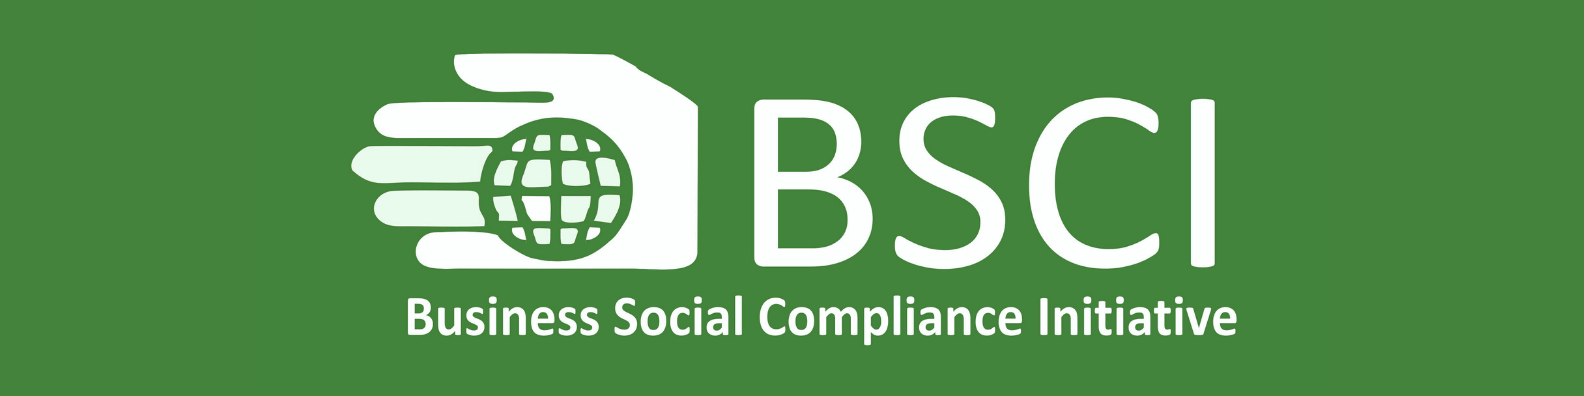 A logo for the business social compliance initiative